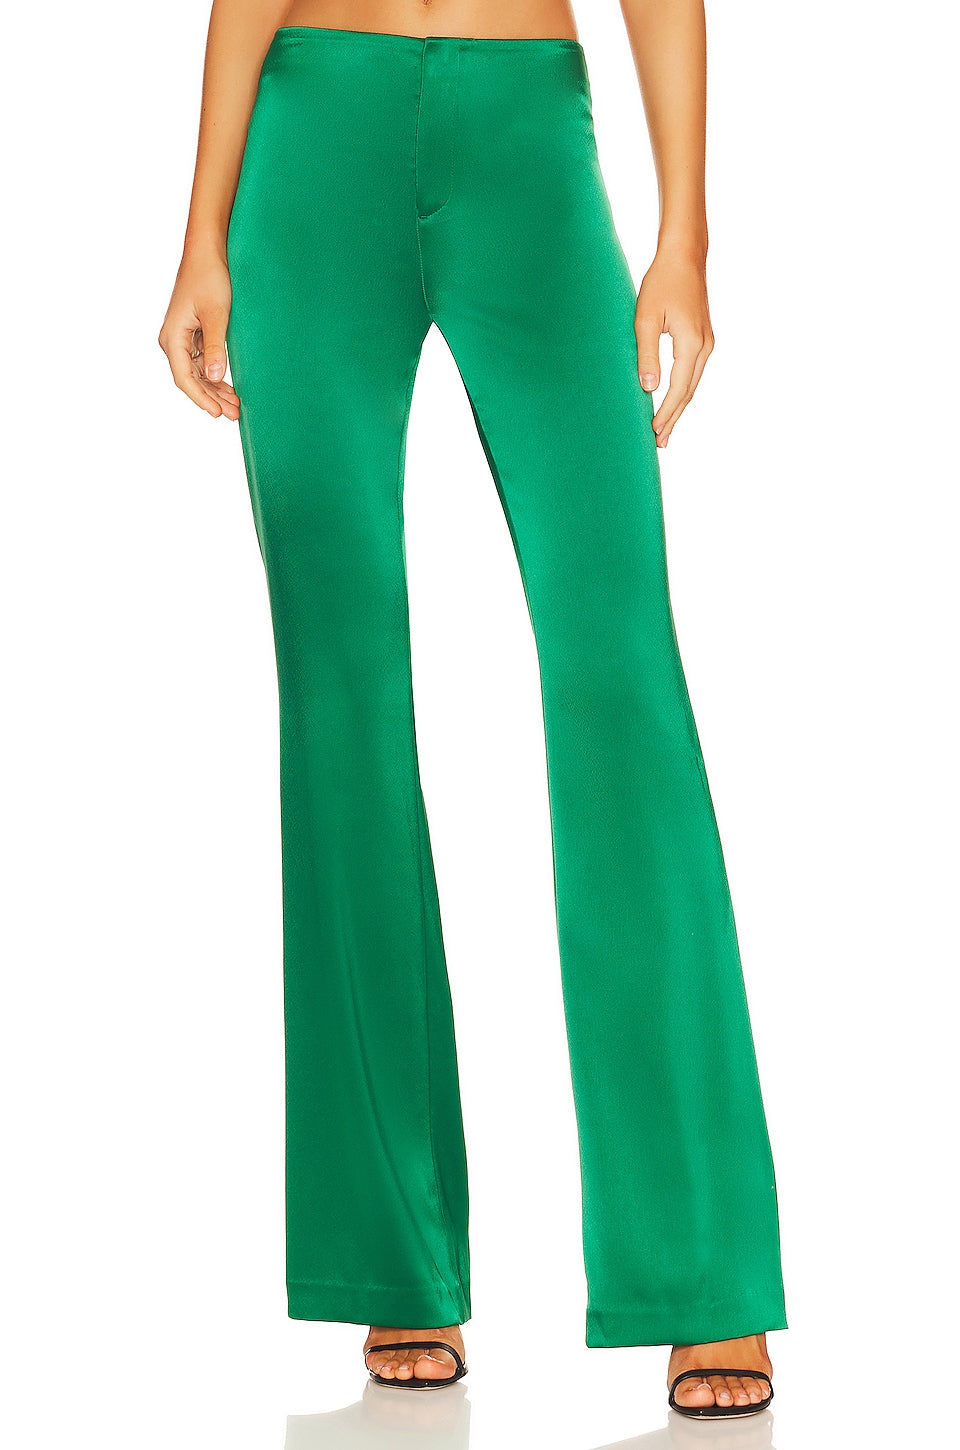 Alice + Olivia Teeny Fit Flare Bootcut Pant in Emerald SIZE MEDIUM